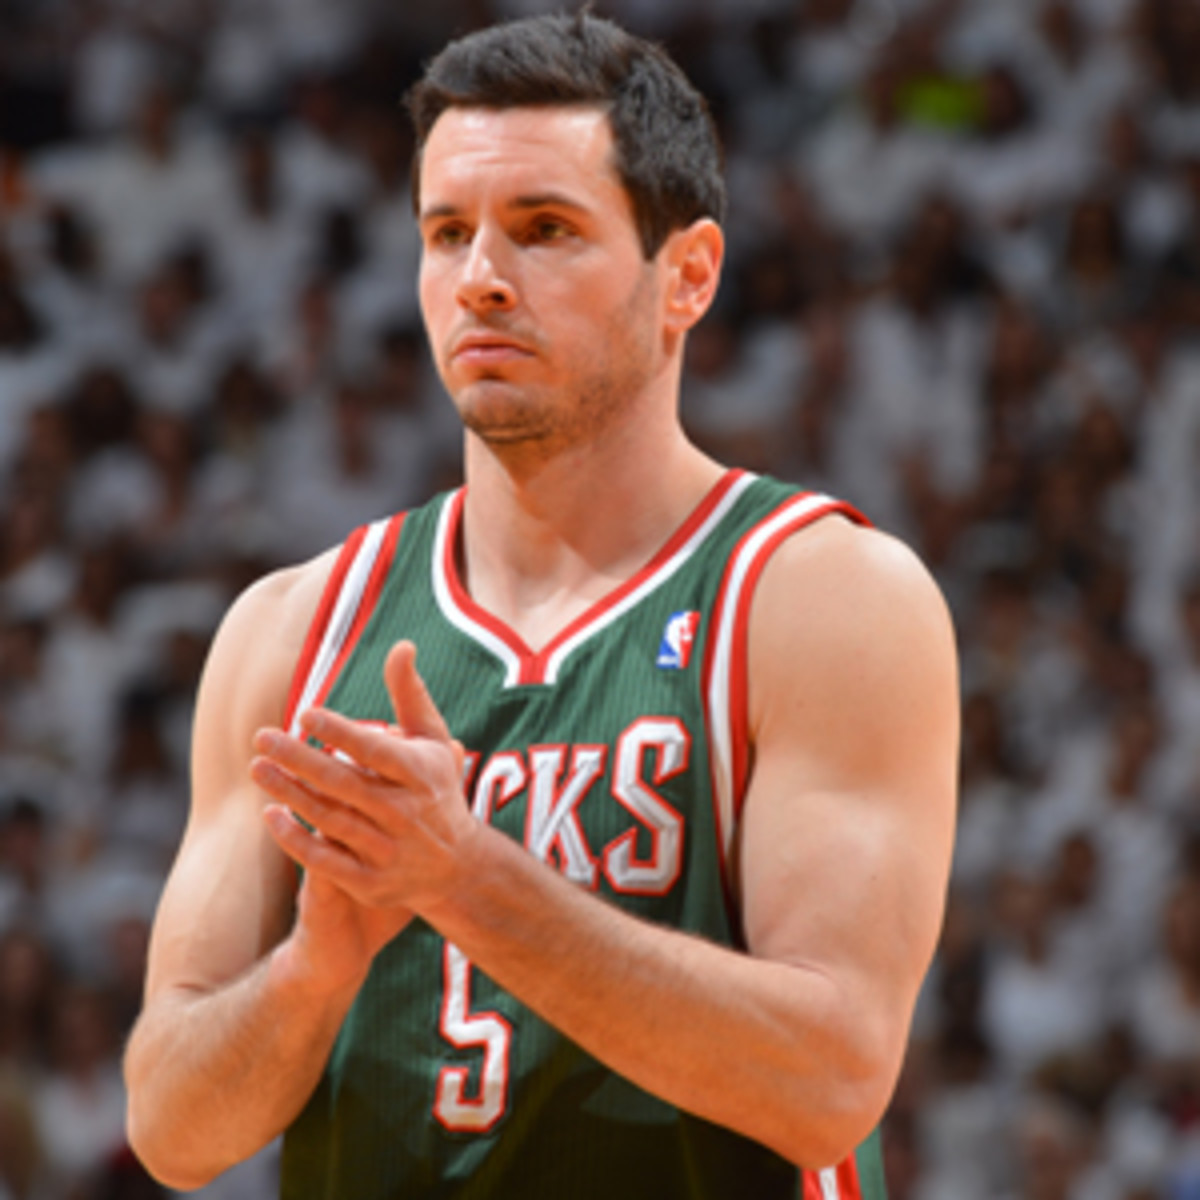 J.J. Redick has seen his minutes decrease in the playoffs. (Jesse D. Garrabrant/NBAE via Getty Images)